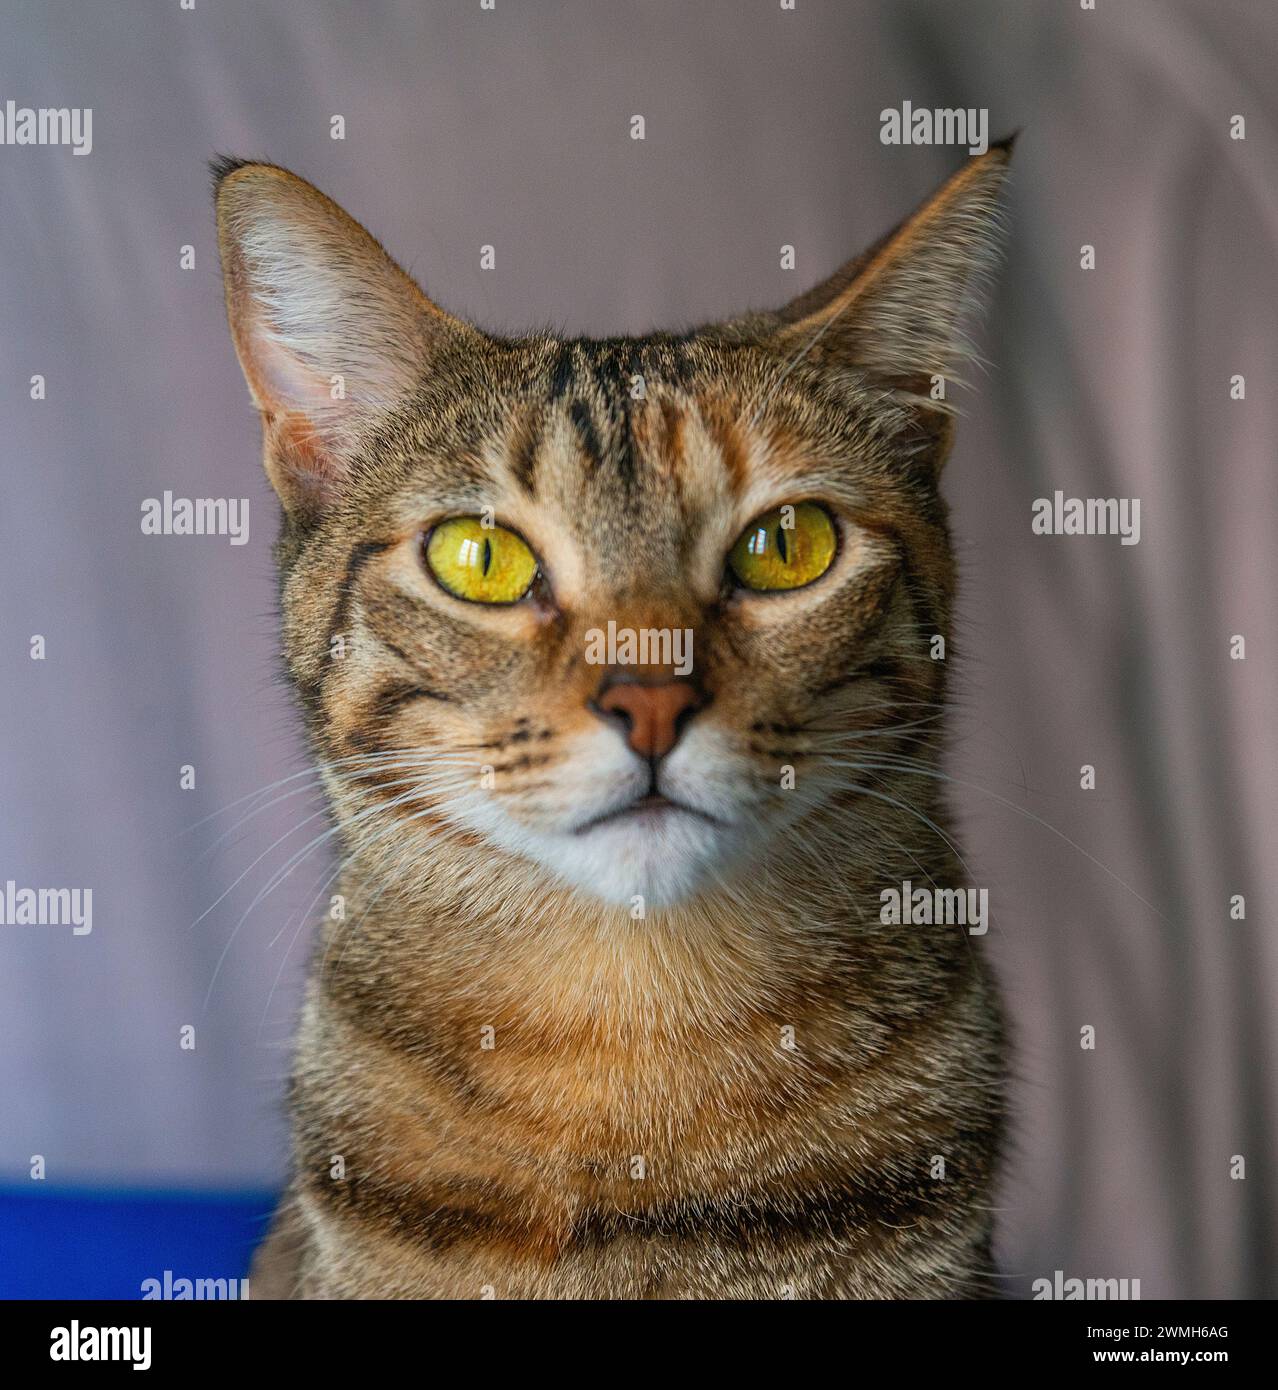 Tabby cat at home. Stock Photo